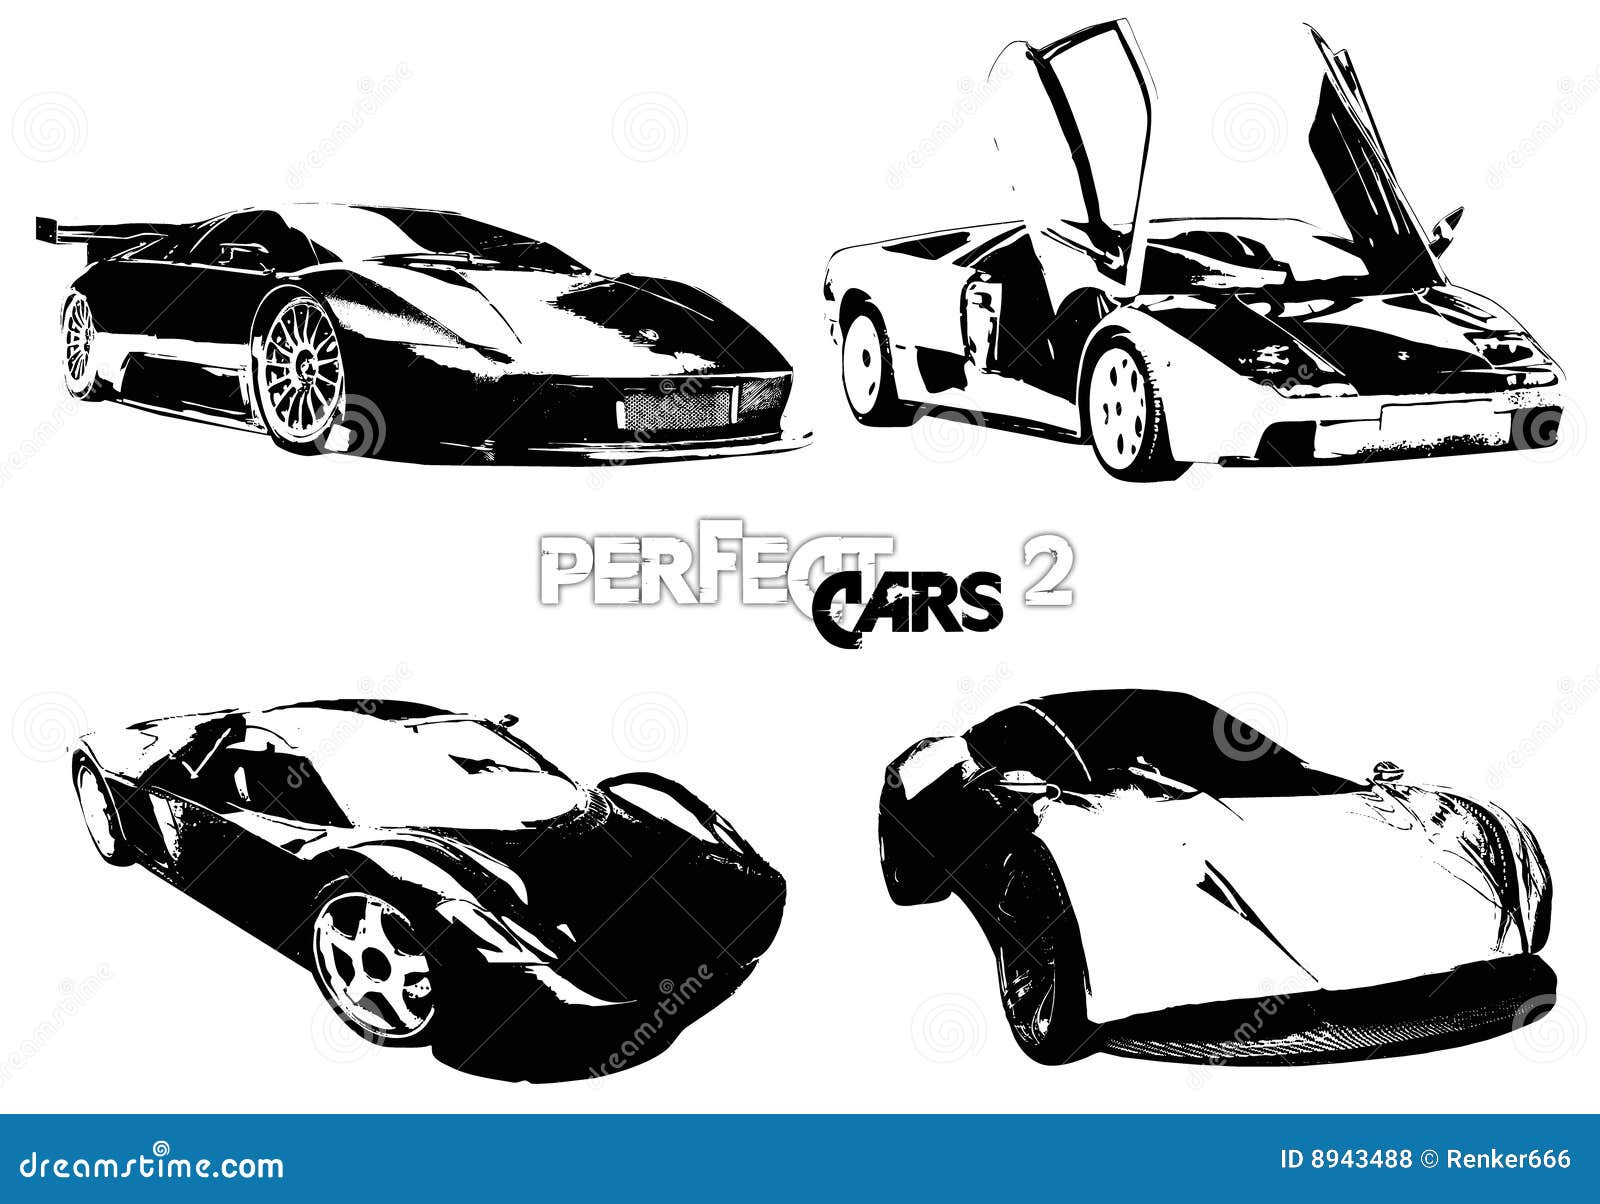 Vector Perfect Cars 2 Royalty Free Stock Photos - Image ...